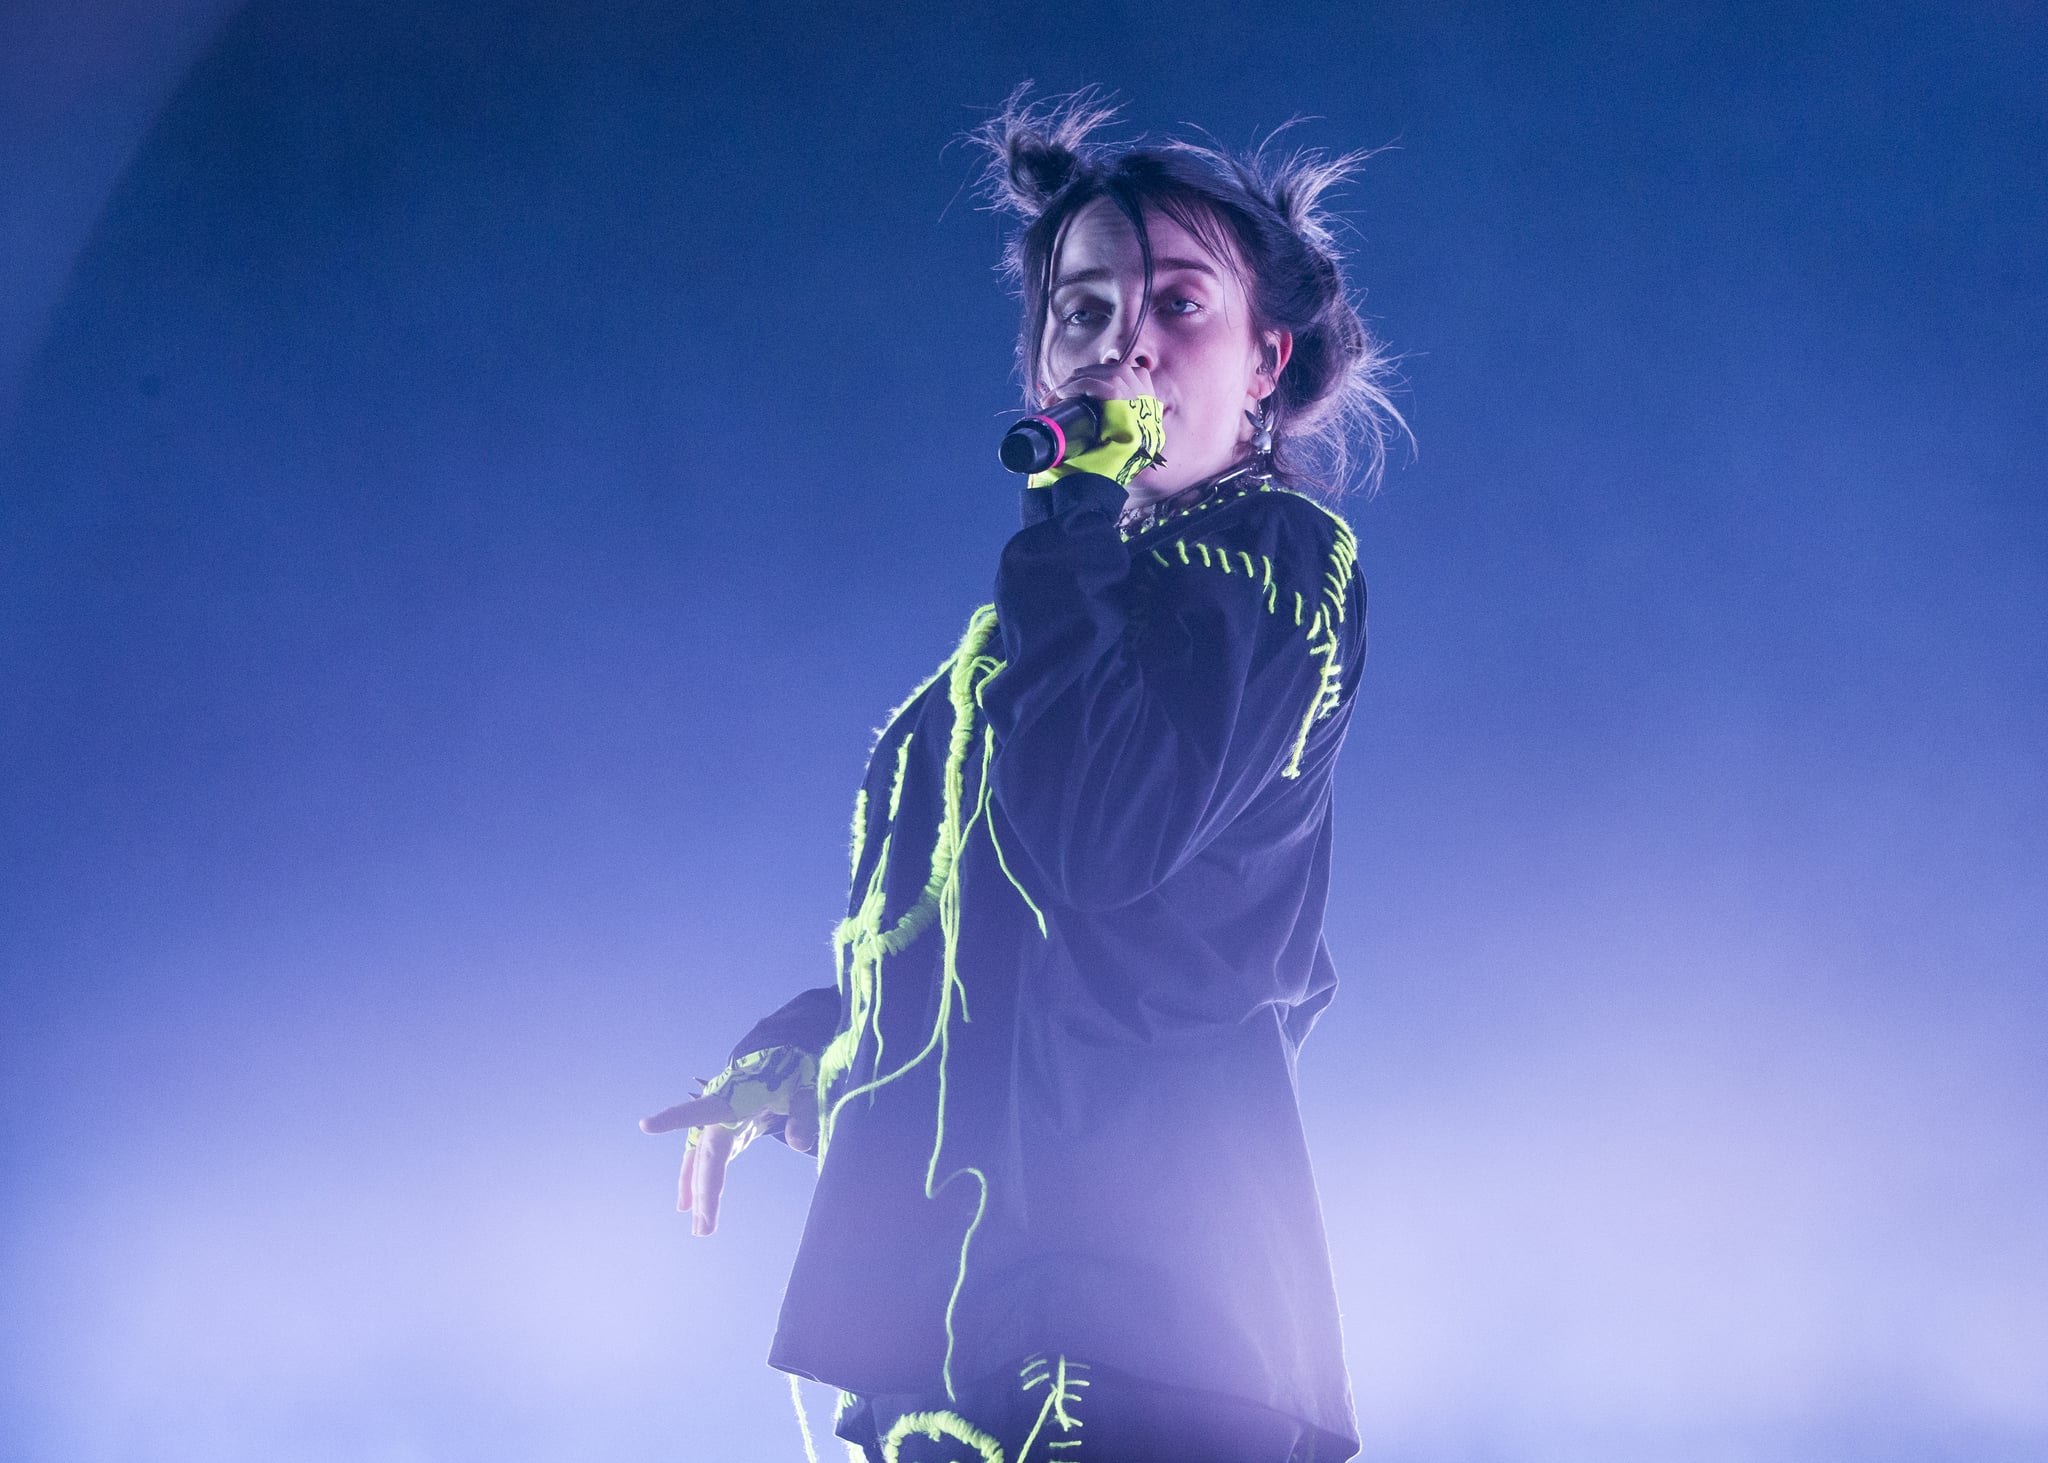 PERTH, AUSTRALIA - MAY 10: Billie Eilish performs on stage at the Fremantle Arts Centre on May 10, 2019 in Perth, Australia. (Photo by Matt Jelonek/WireImage)